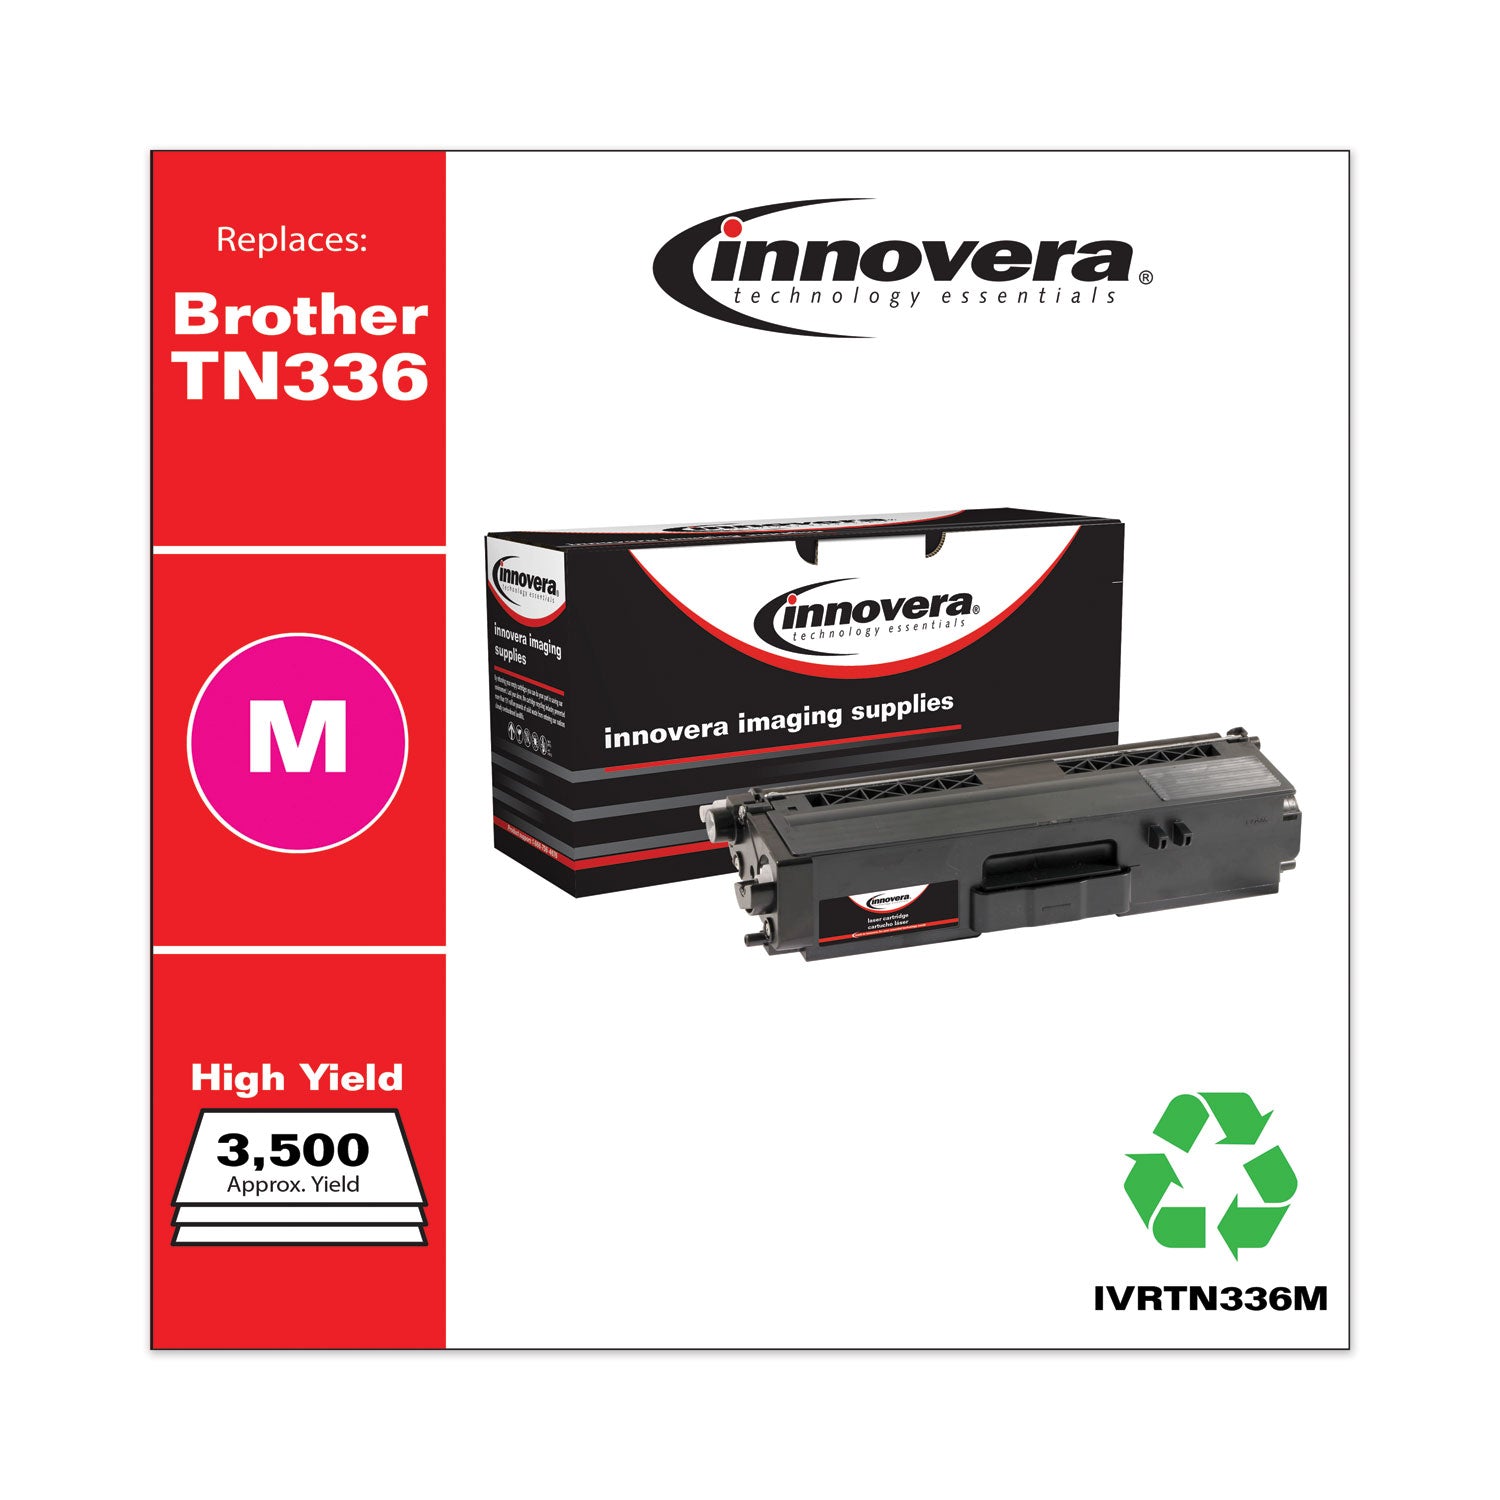 remanufactured-magenta-high-yield-toner-replacement-for-tn336m-3500-page-yield-ships-in-1-3-business-days_ivrtn336m - 2